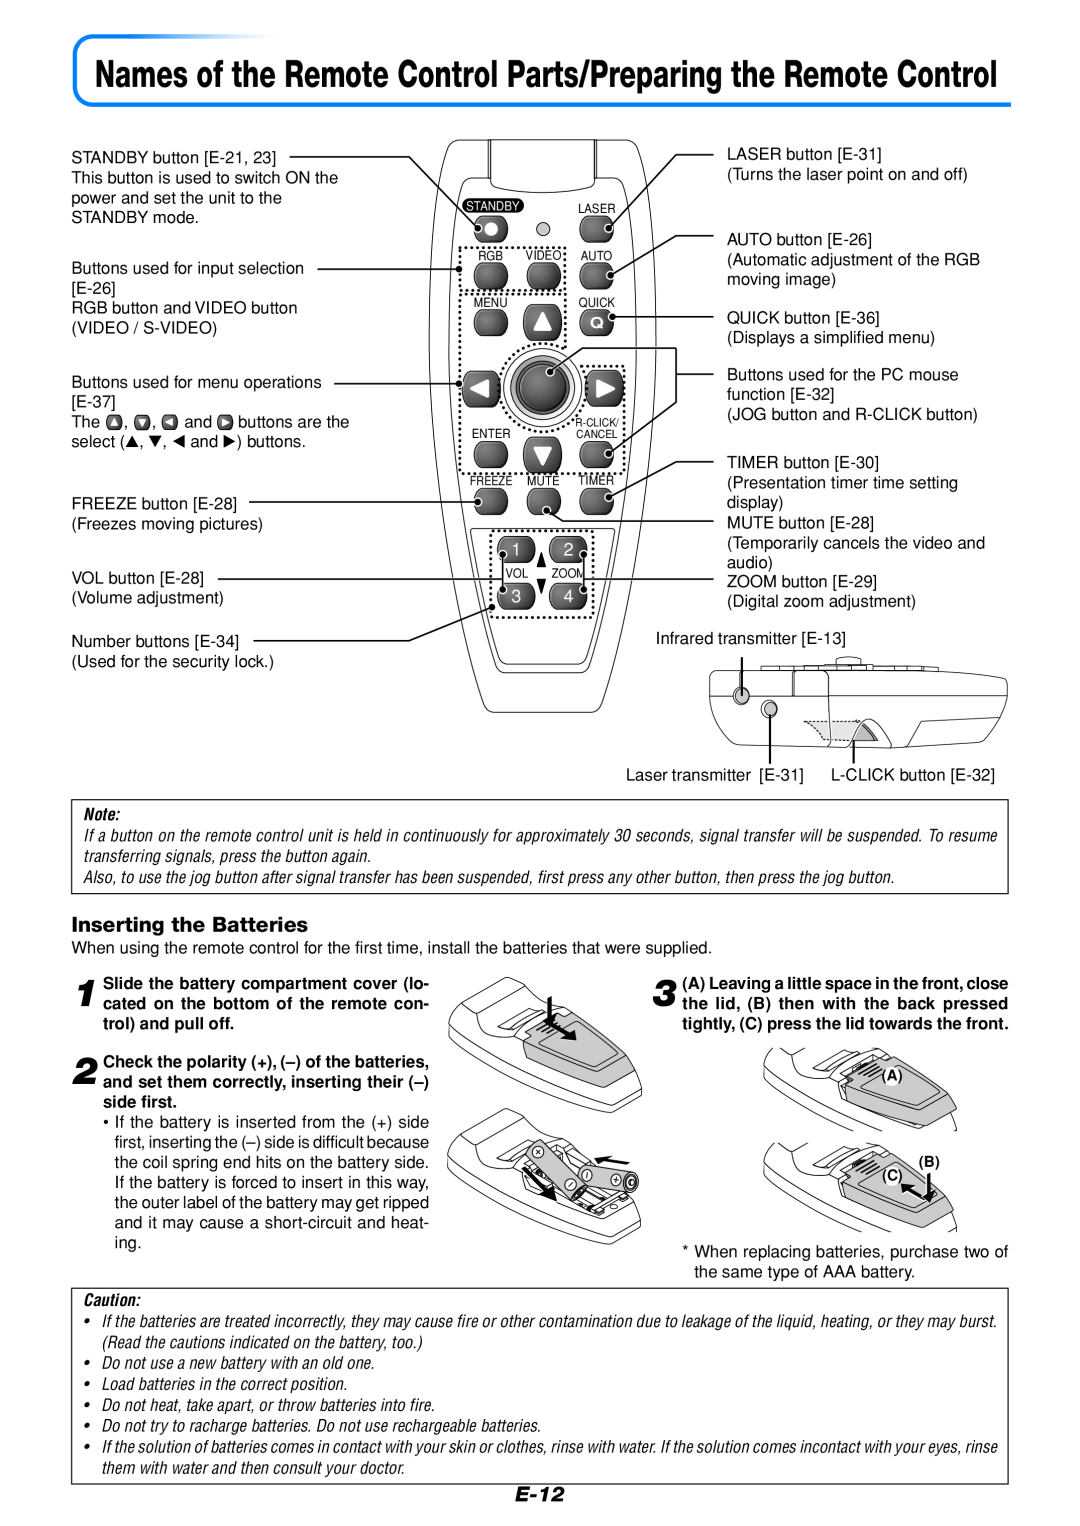 Mitsubishi Electronics DATA PROJECTOR user manual Inserting the Batteries, E-12, Do not use a new battery with an old one 